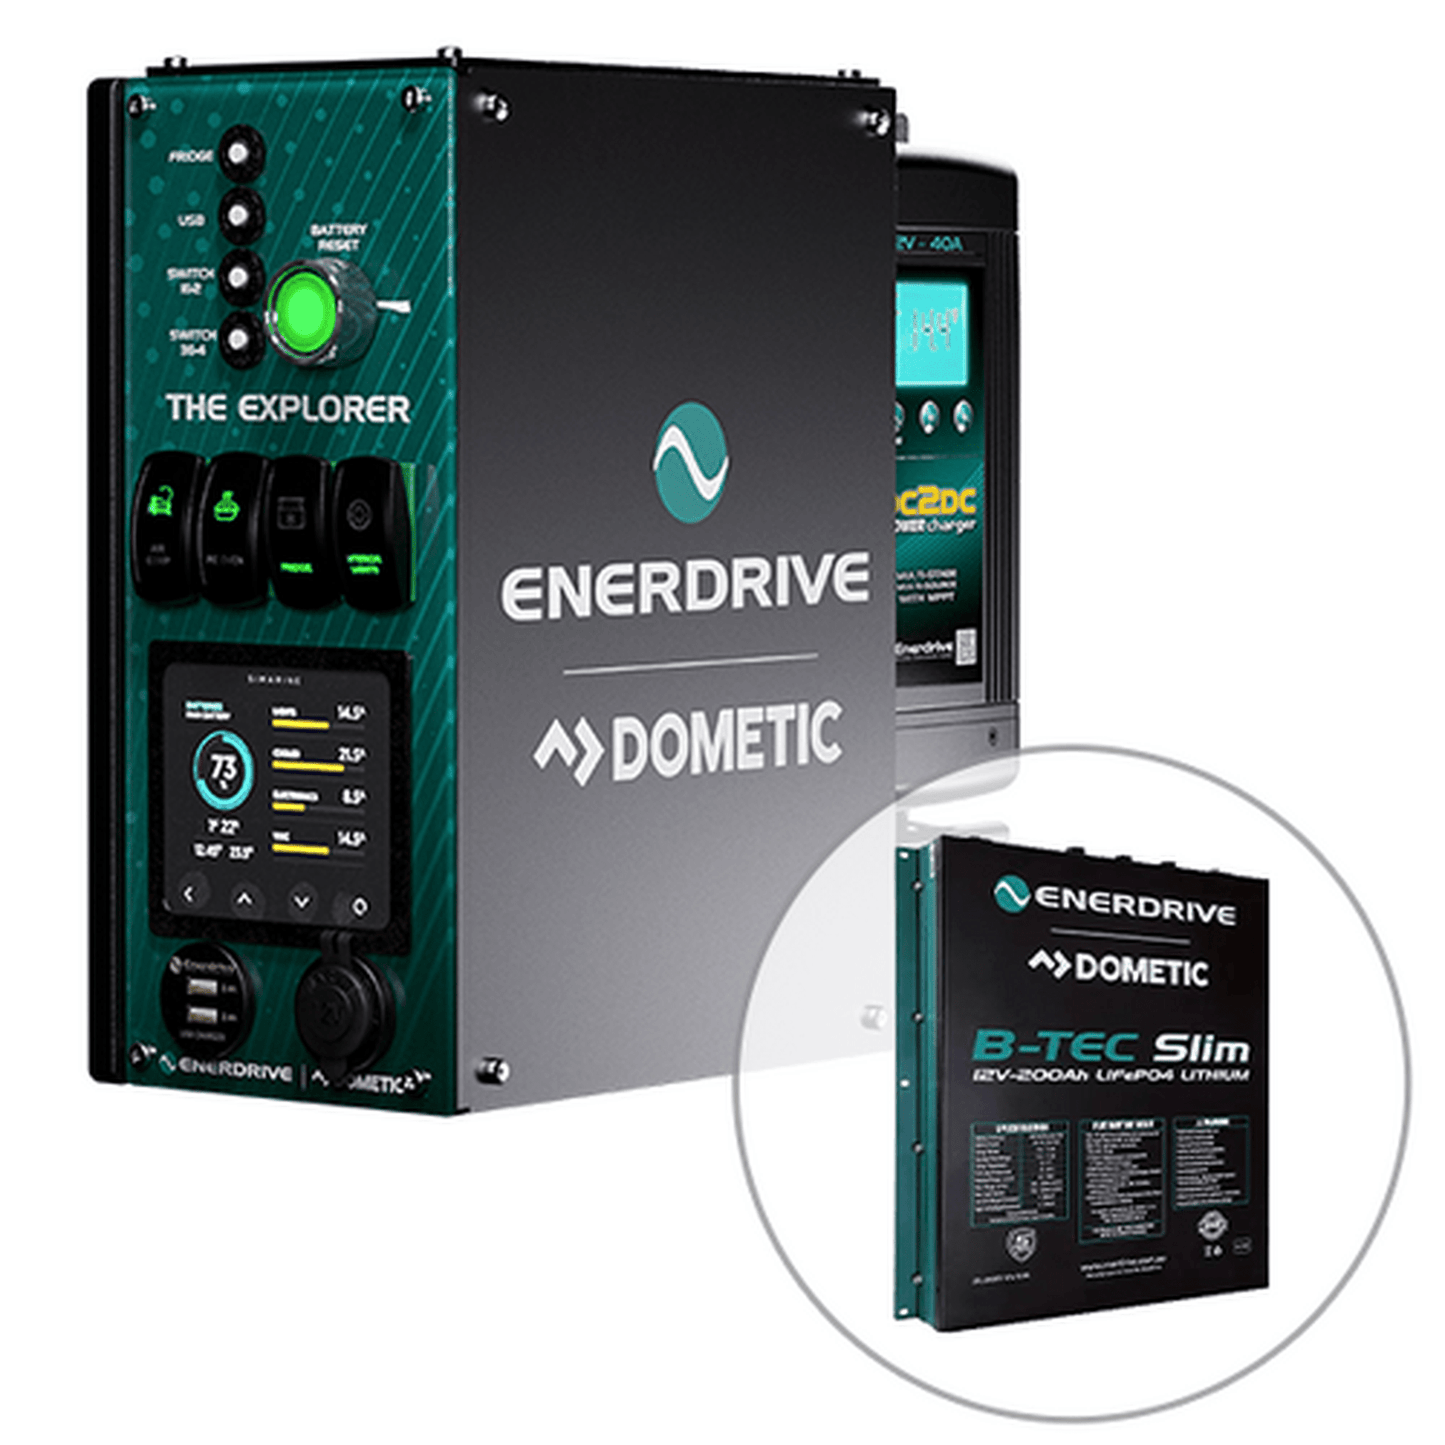 Enerdrive 4WD Canopy Explorer System with 40A DC2DC Charger, With Lithium Battery